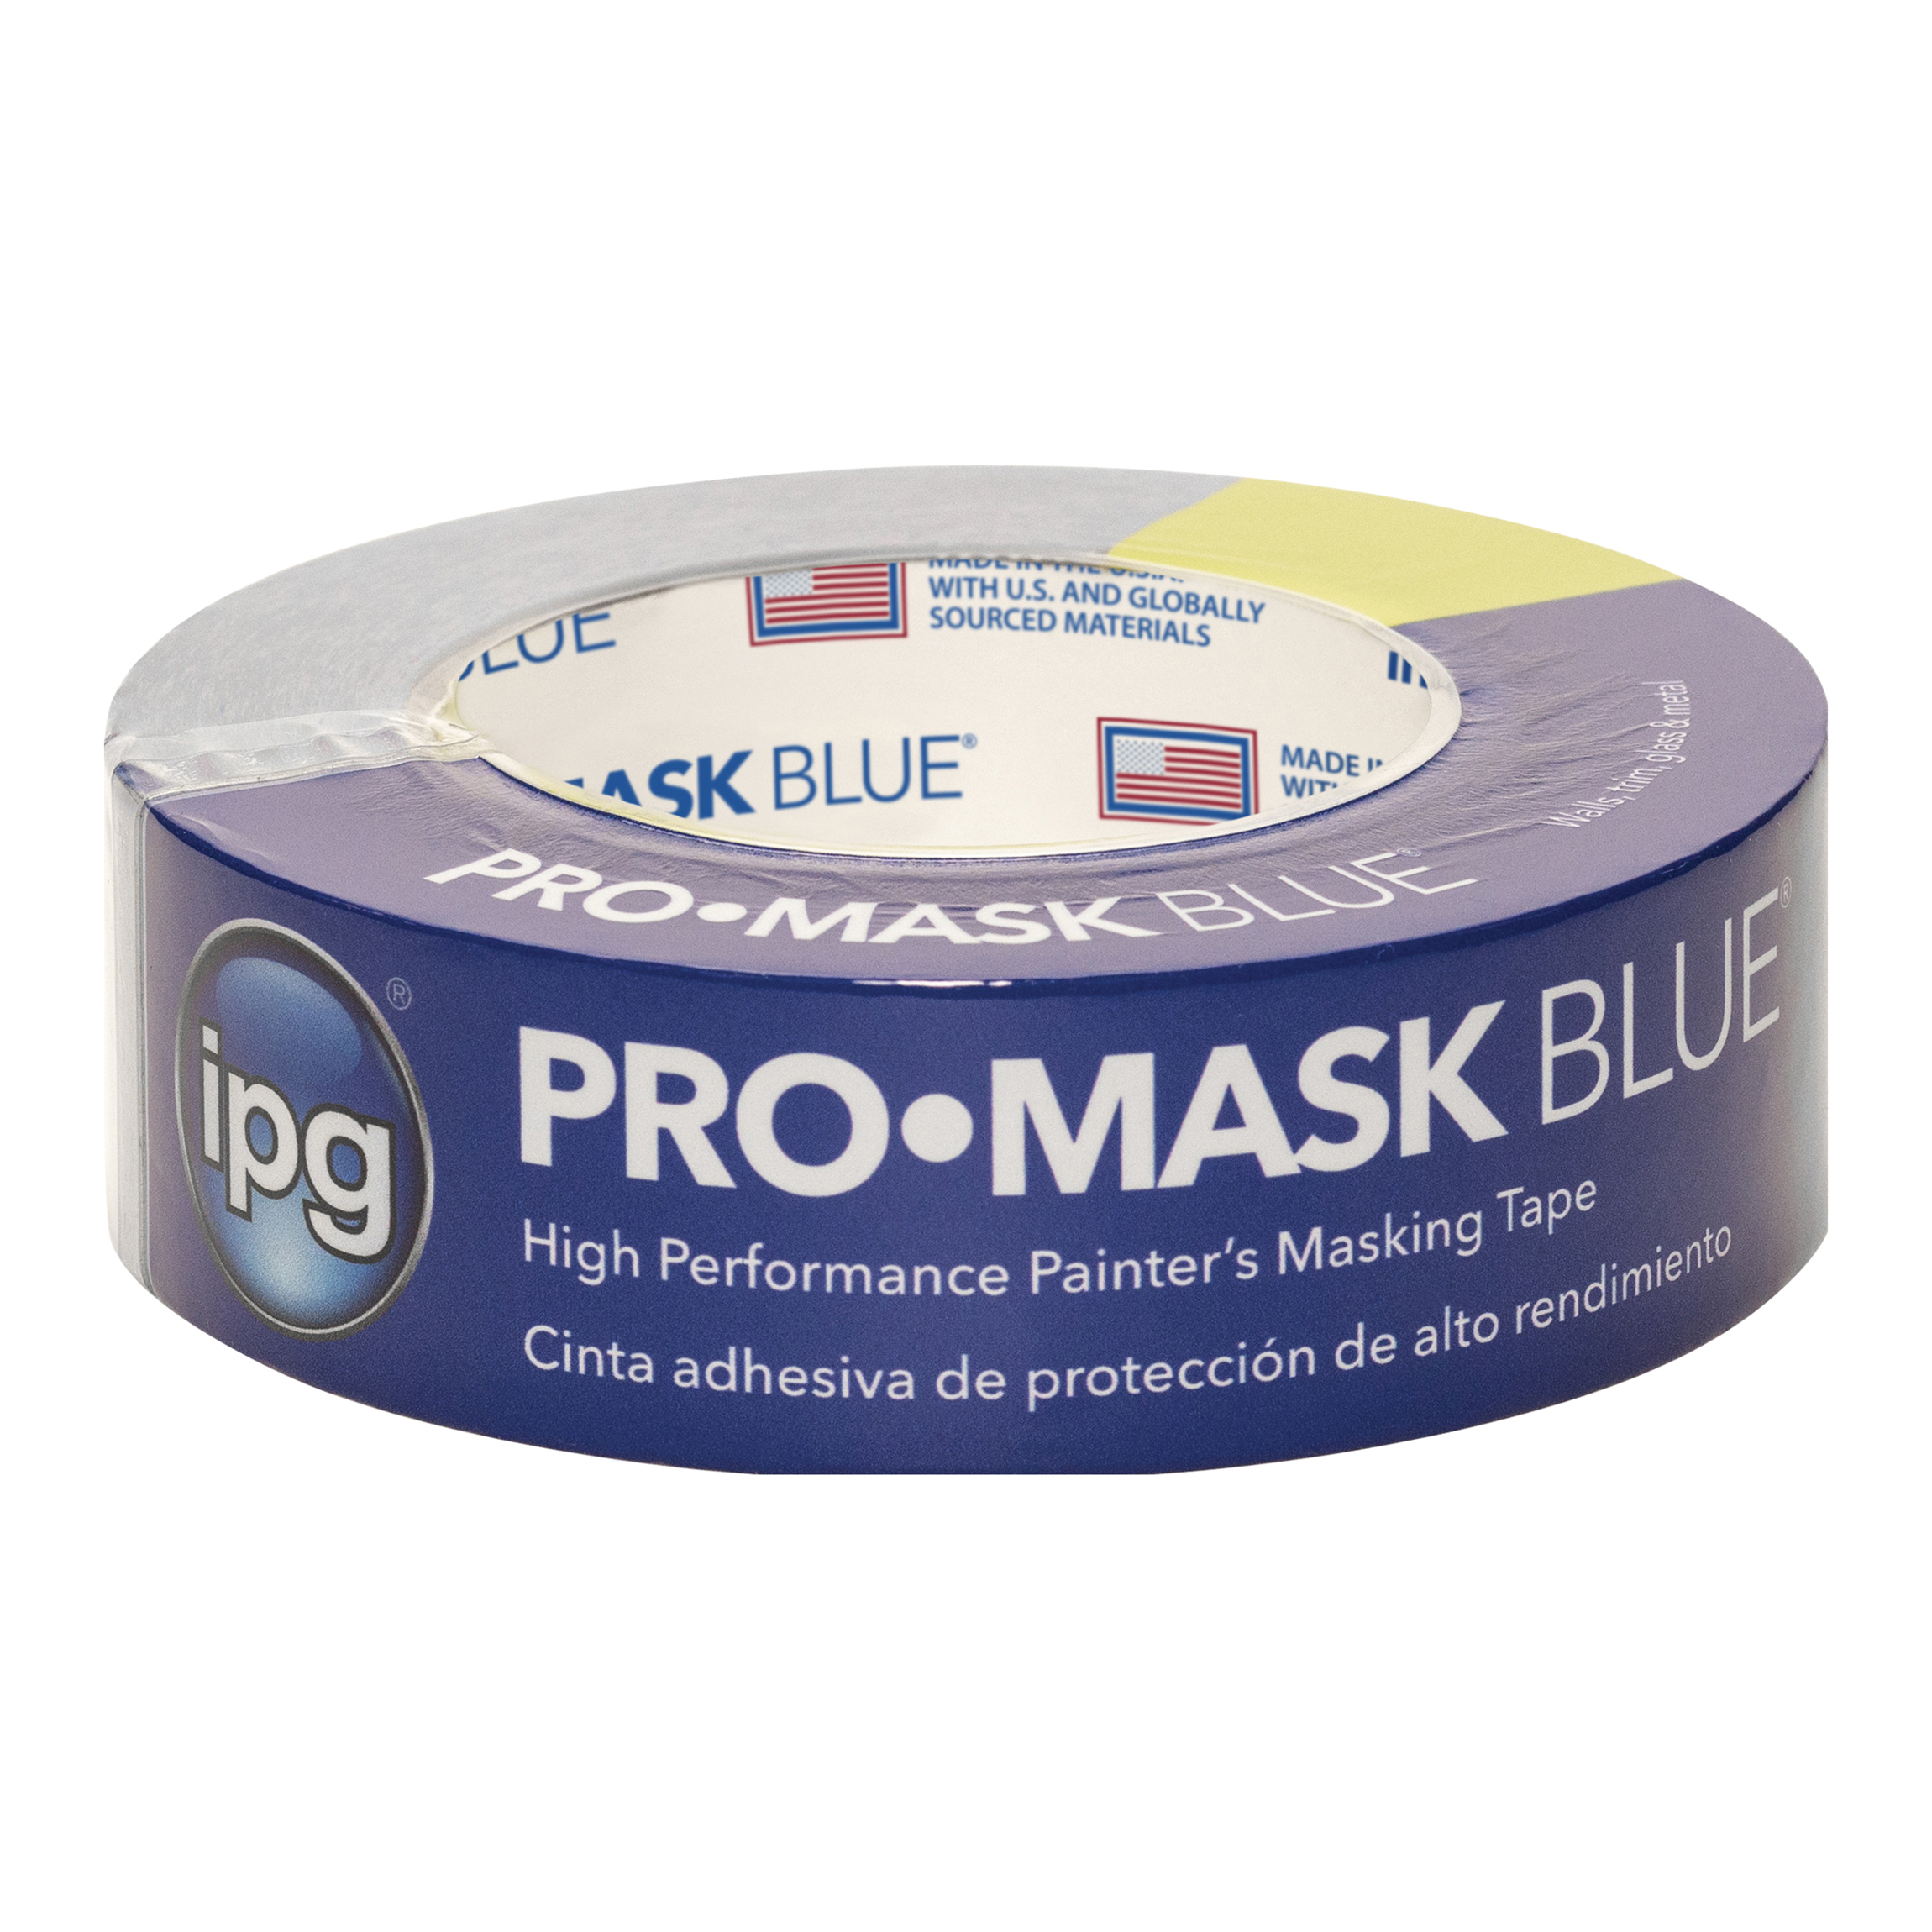 IPG PMD36 Masking Tape, 60 yd L, 1.41 in W, Crepe Paper Backing, Dark Blue